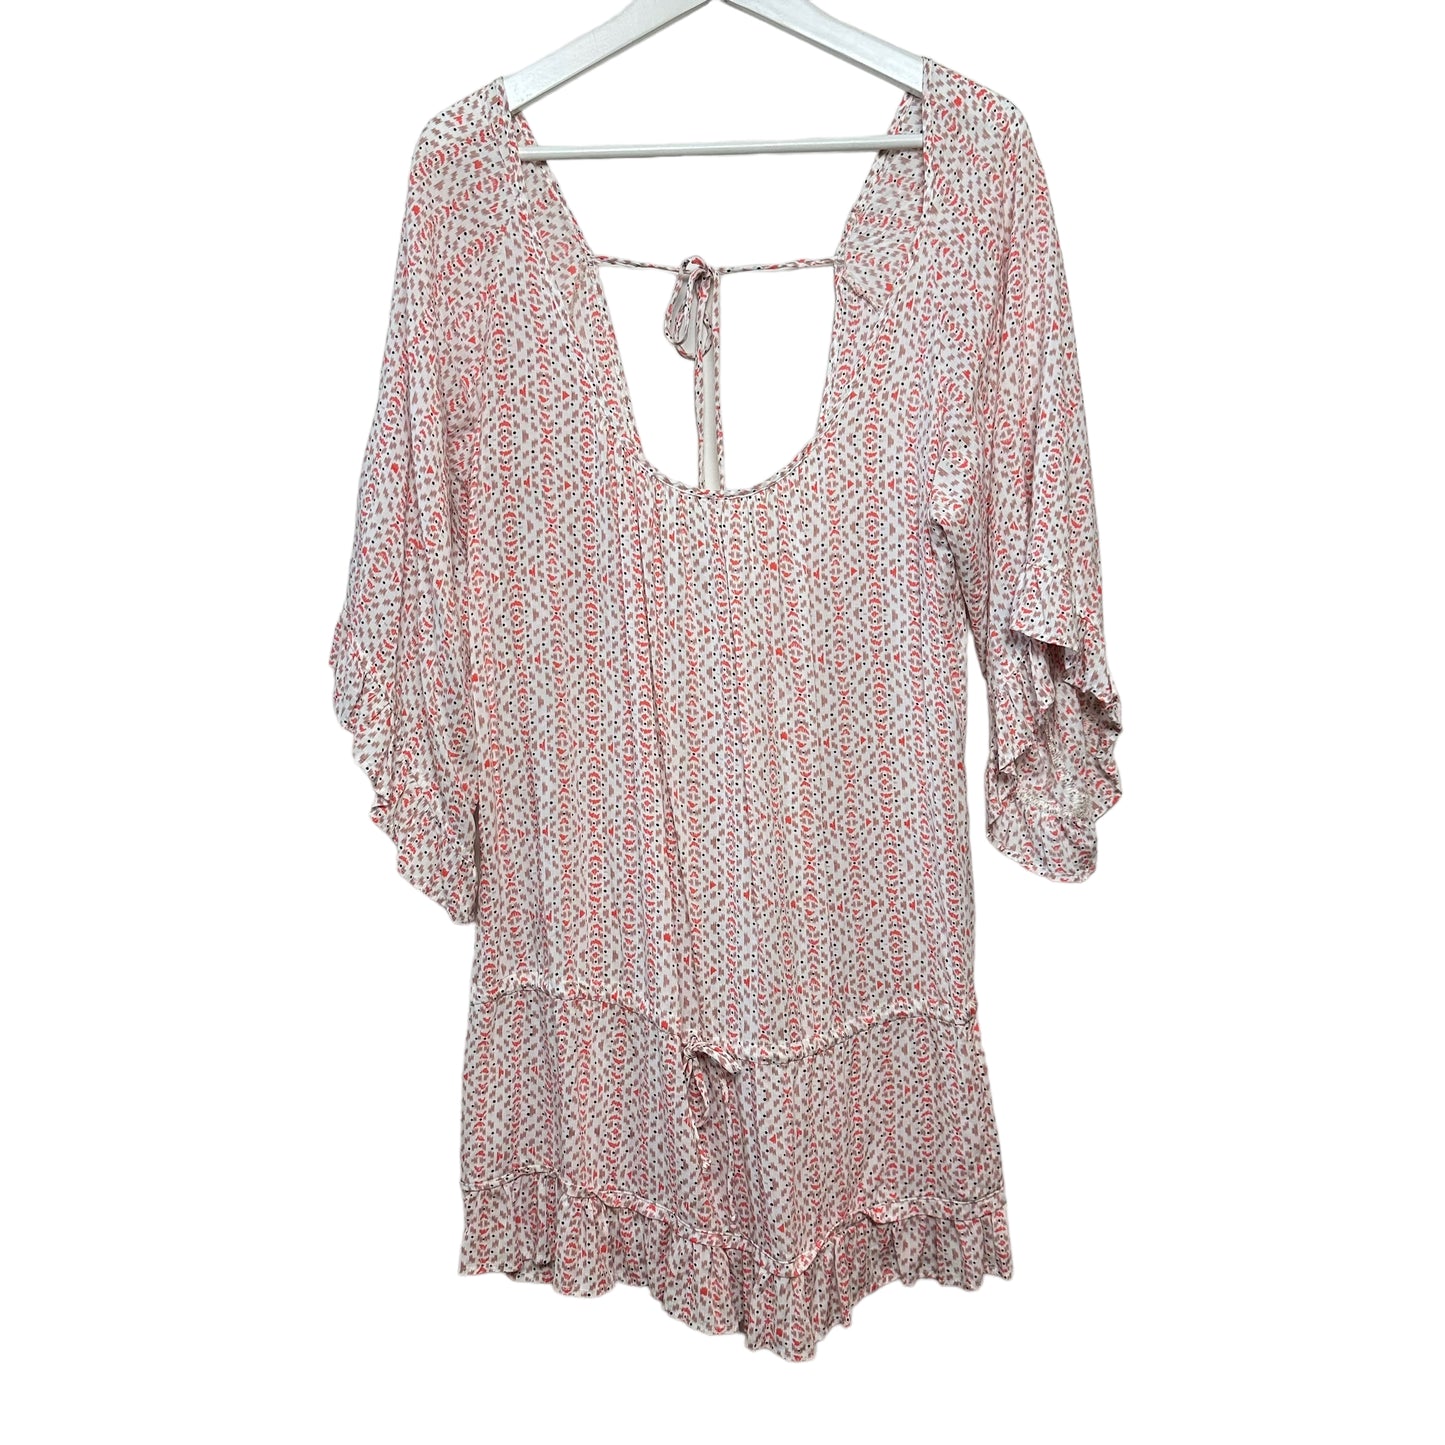 New with Tags Eberjey Baja Babe Soleil Multi Coverup Dress M/L